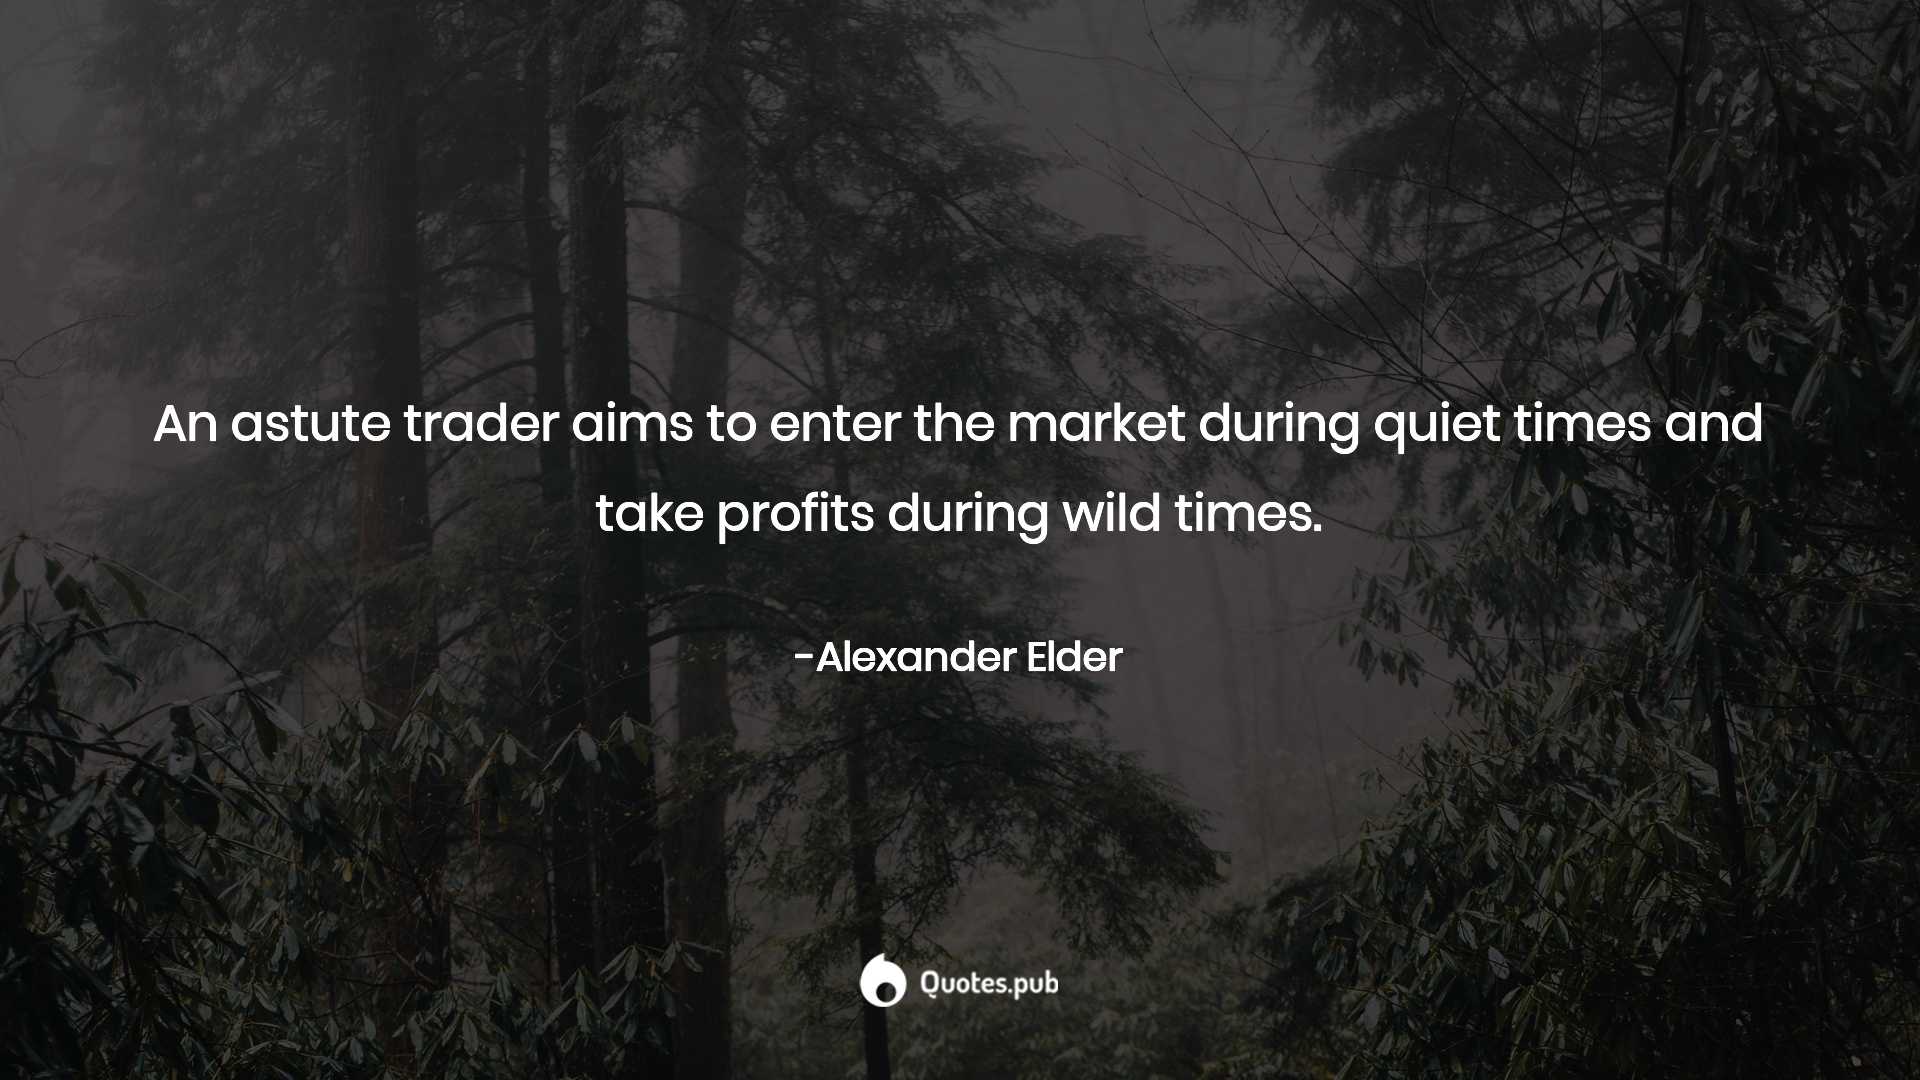 Trading Tools and Systems Quotes & Sayings with Wallpaper & Posters